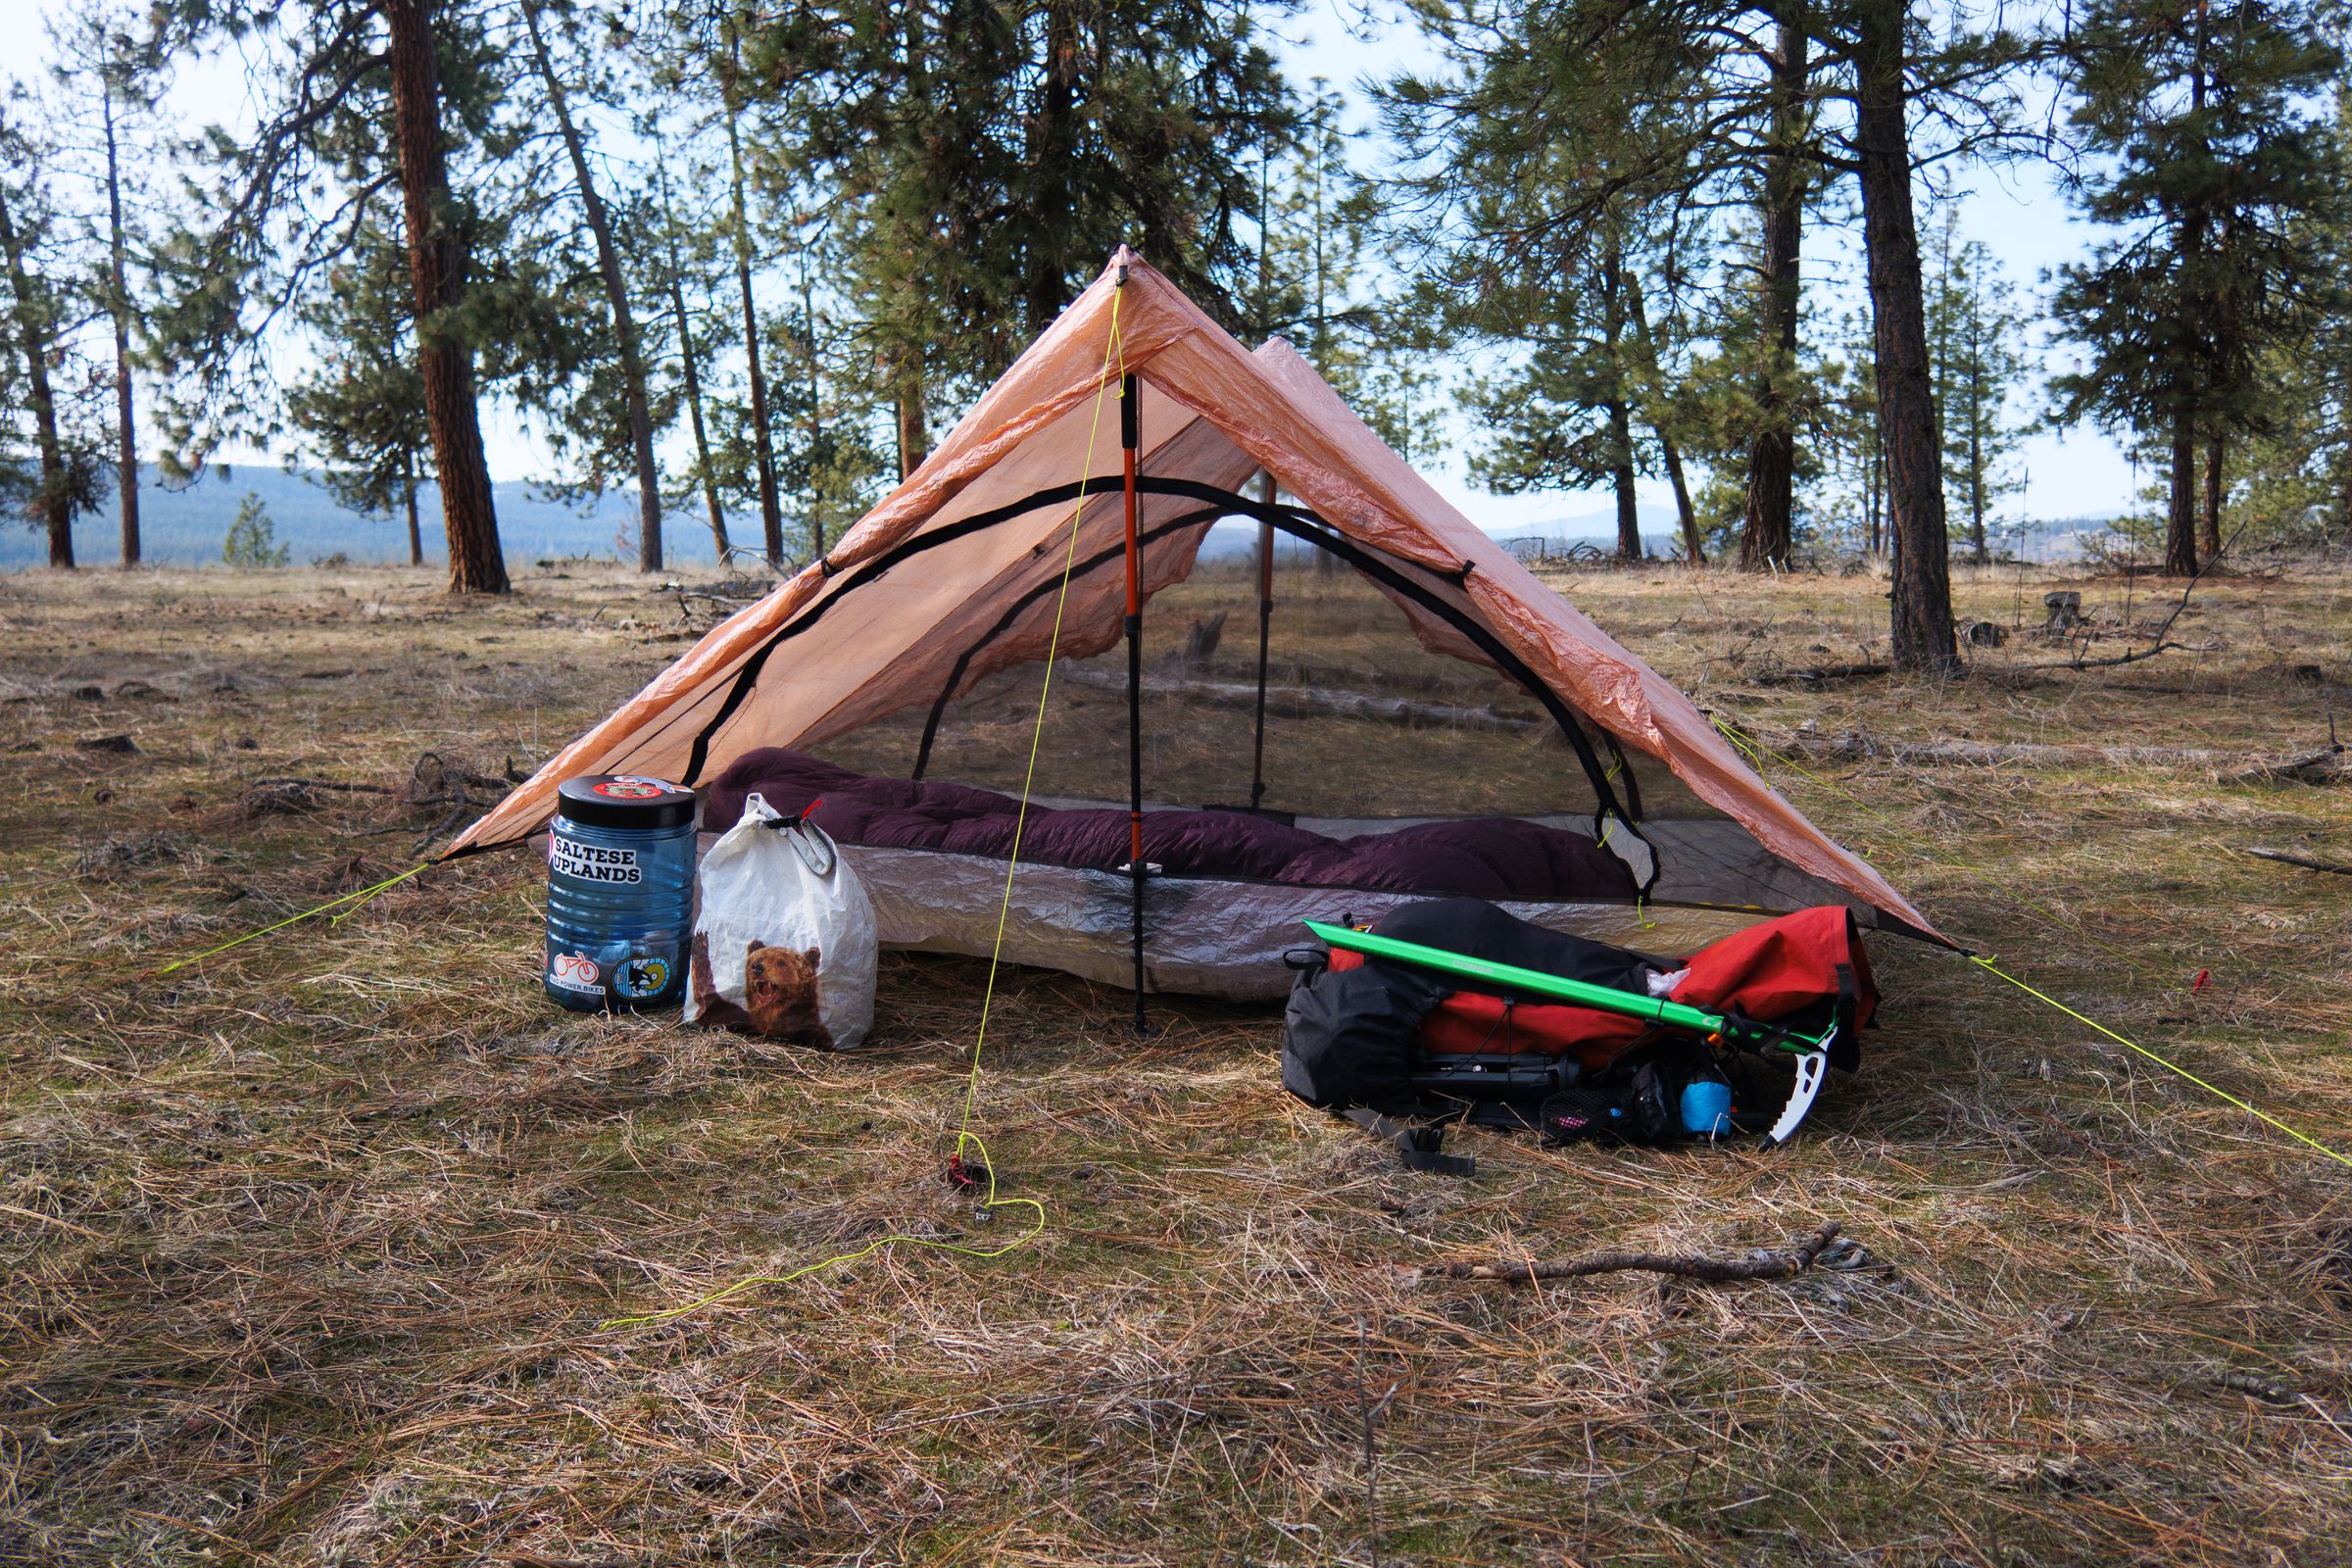 Photo of a tent in some trees, with a backpack and bear can in front of it.